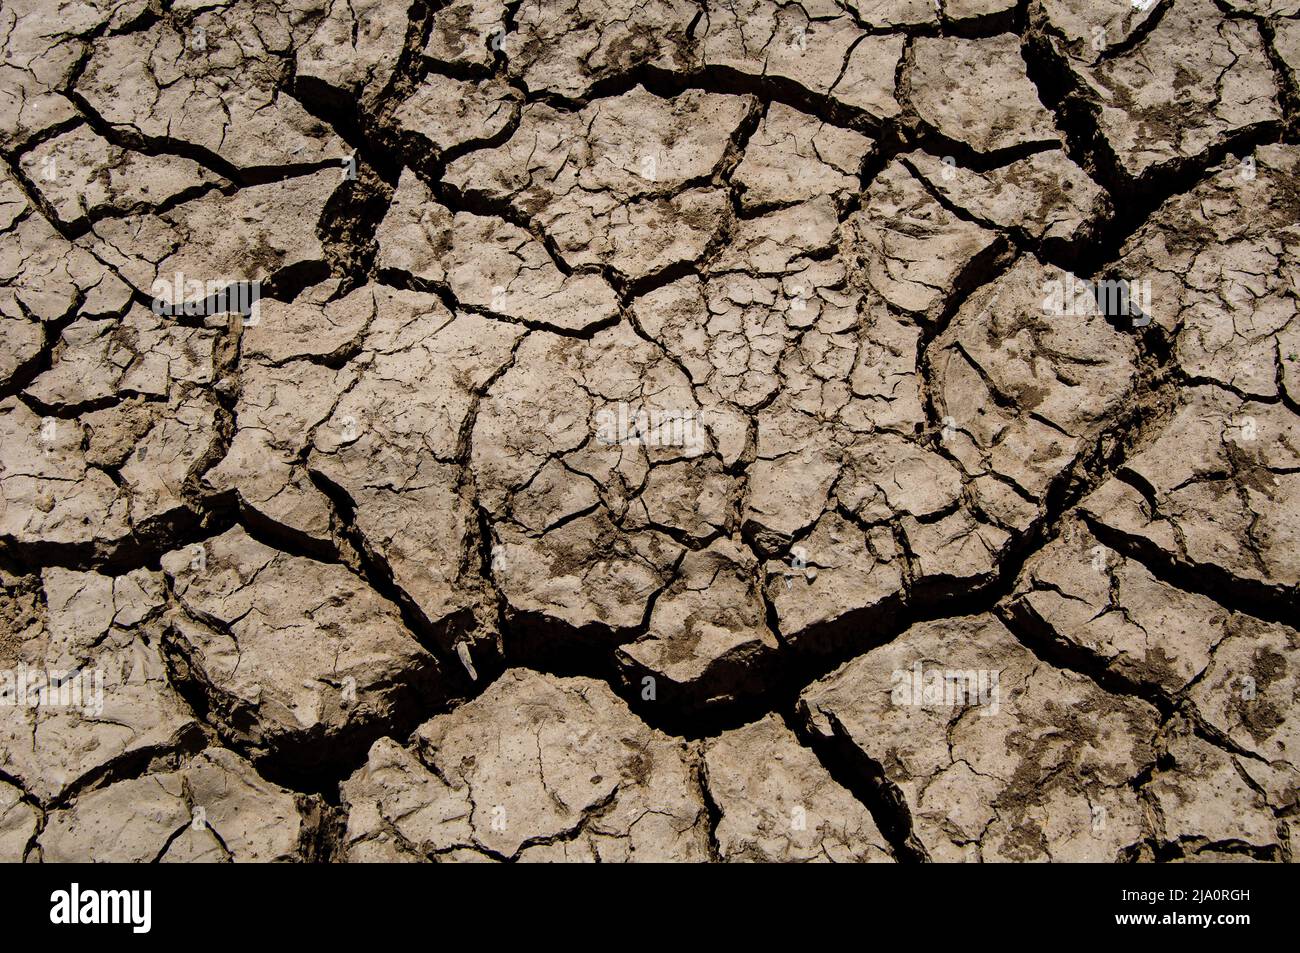 cracked soil detail of dry lake bed Stock Photo